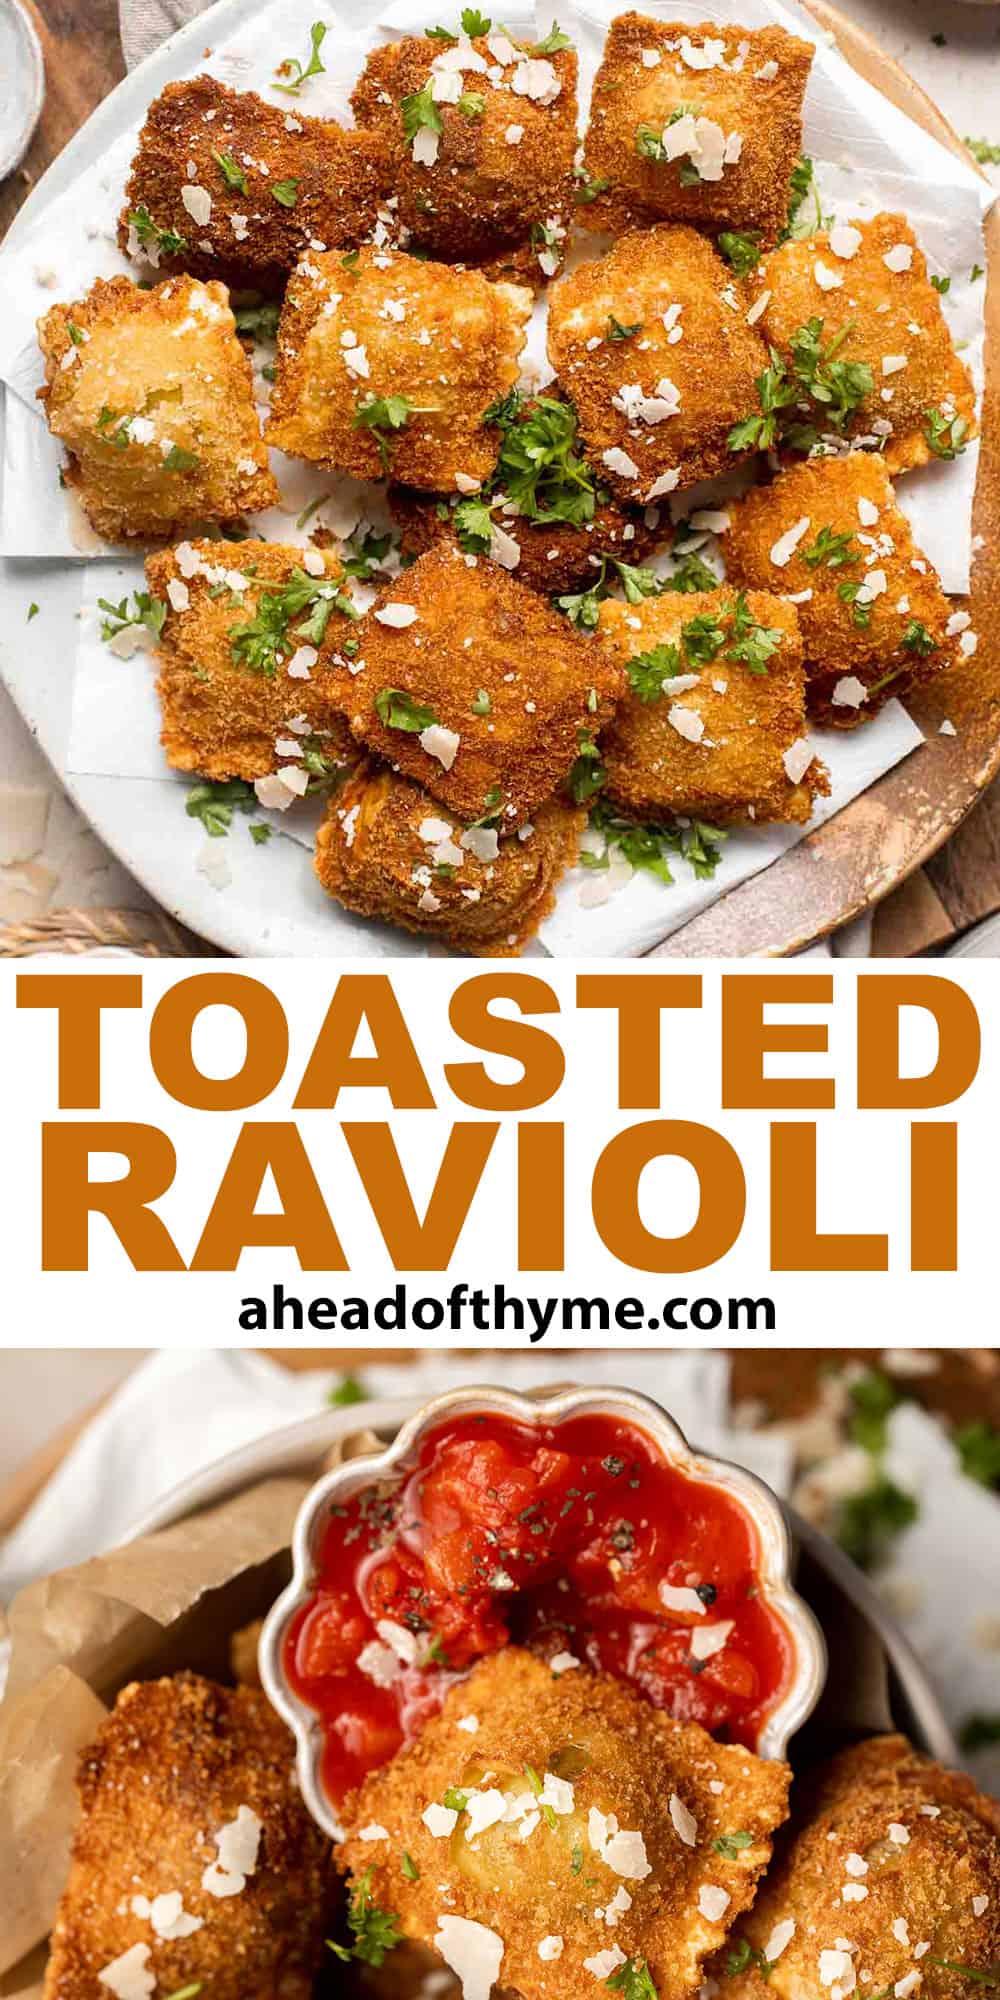 Toasted Ravioli is a classic Italian appetizer that is crispy and golden on the outside, and tender and gooey on the inside. Ready in less than 30 minutes! | aheadofthyme.com